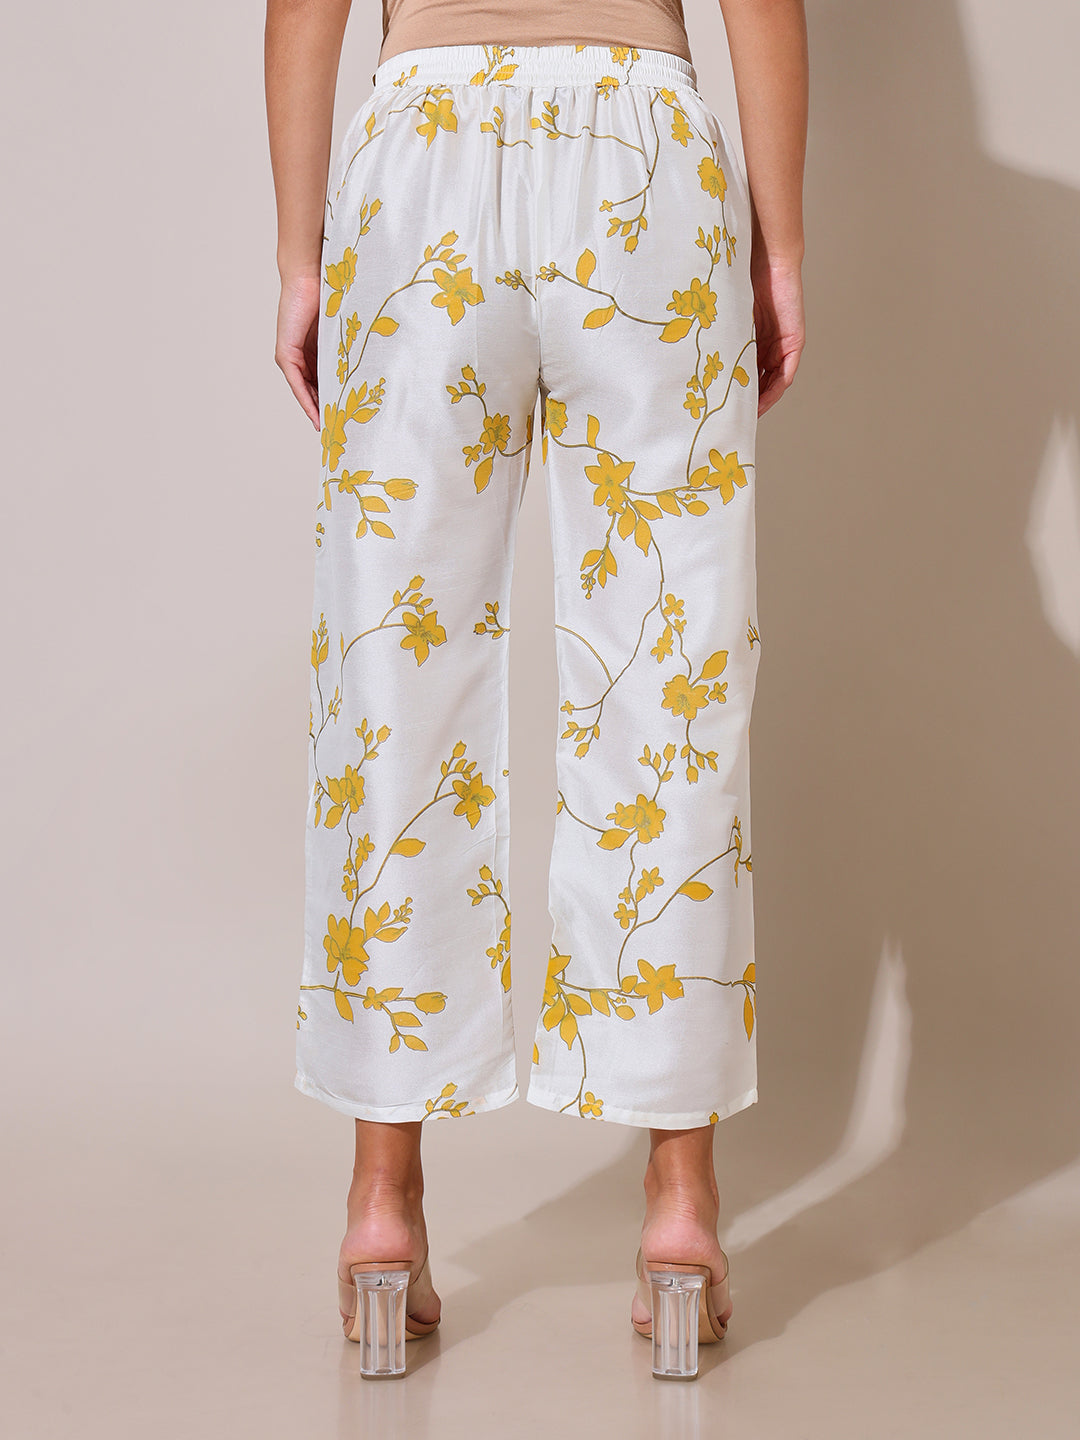 Sunehri Off-White Printed Pants